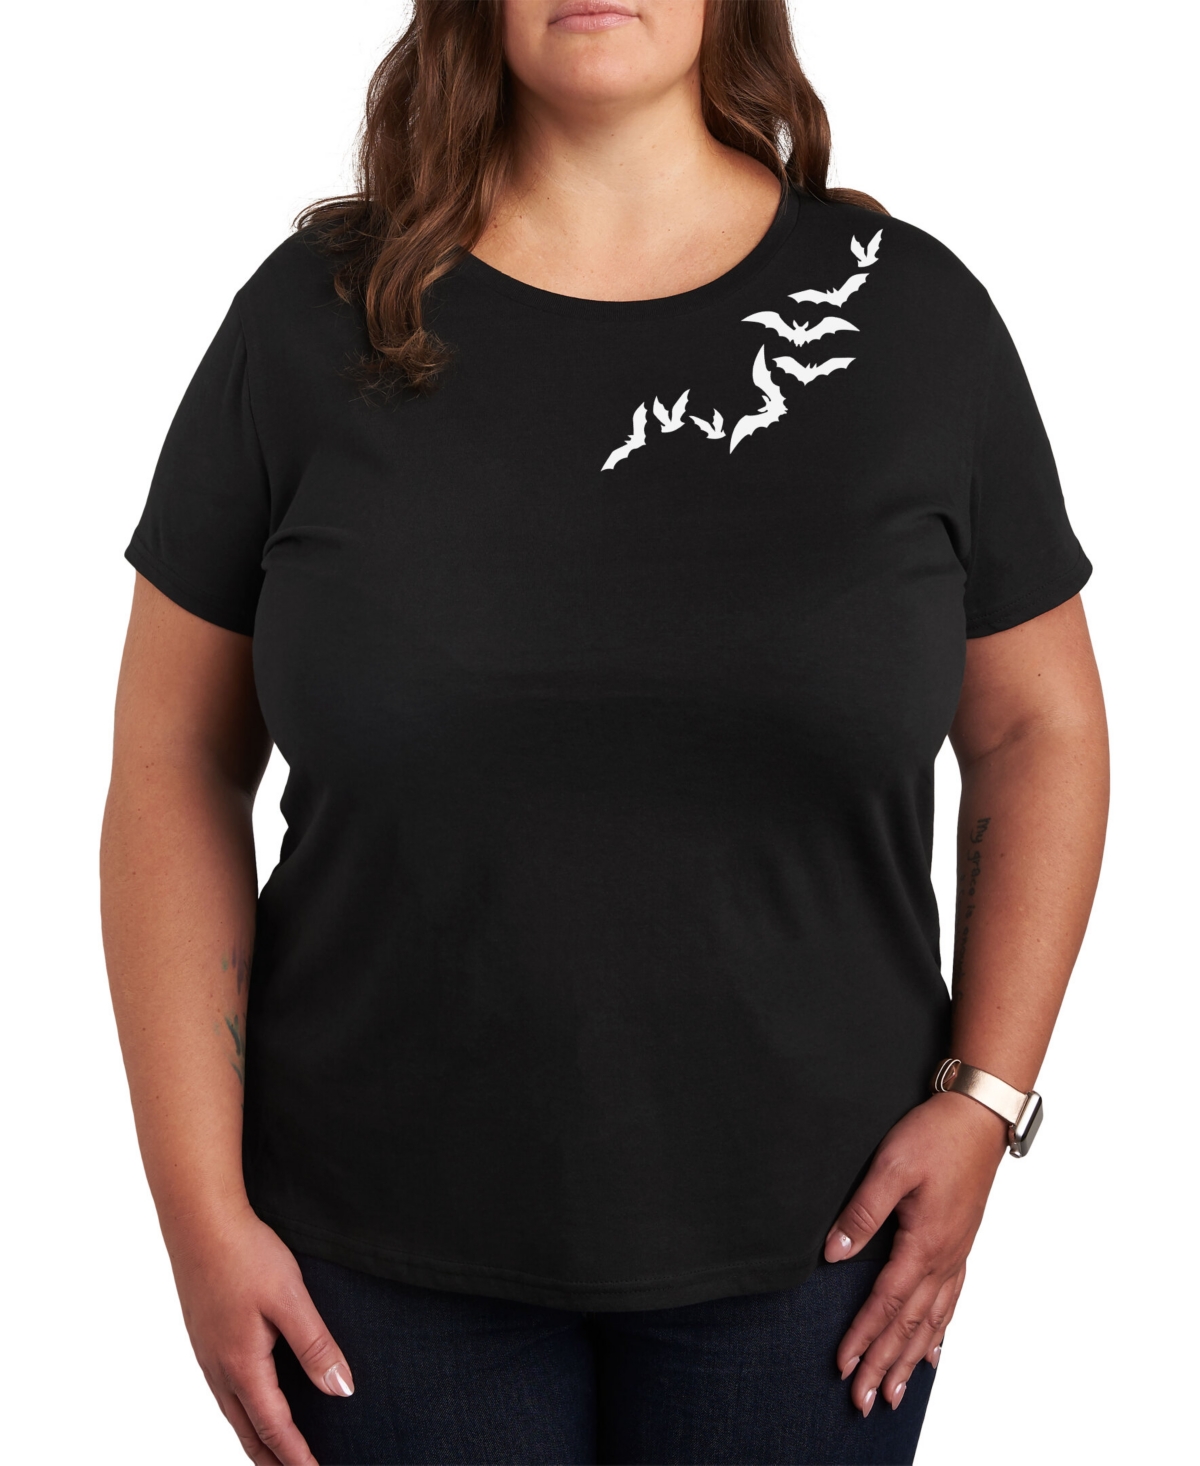 Air Waves Trendy Plus Size Halloween Graphic T-shirt In Black